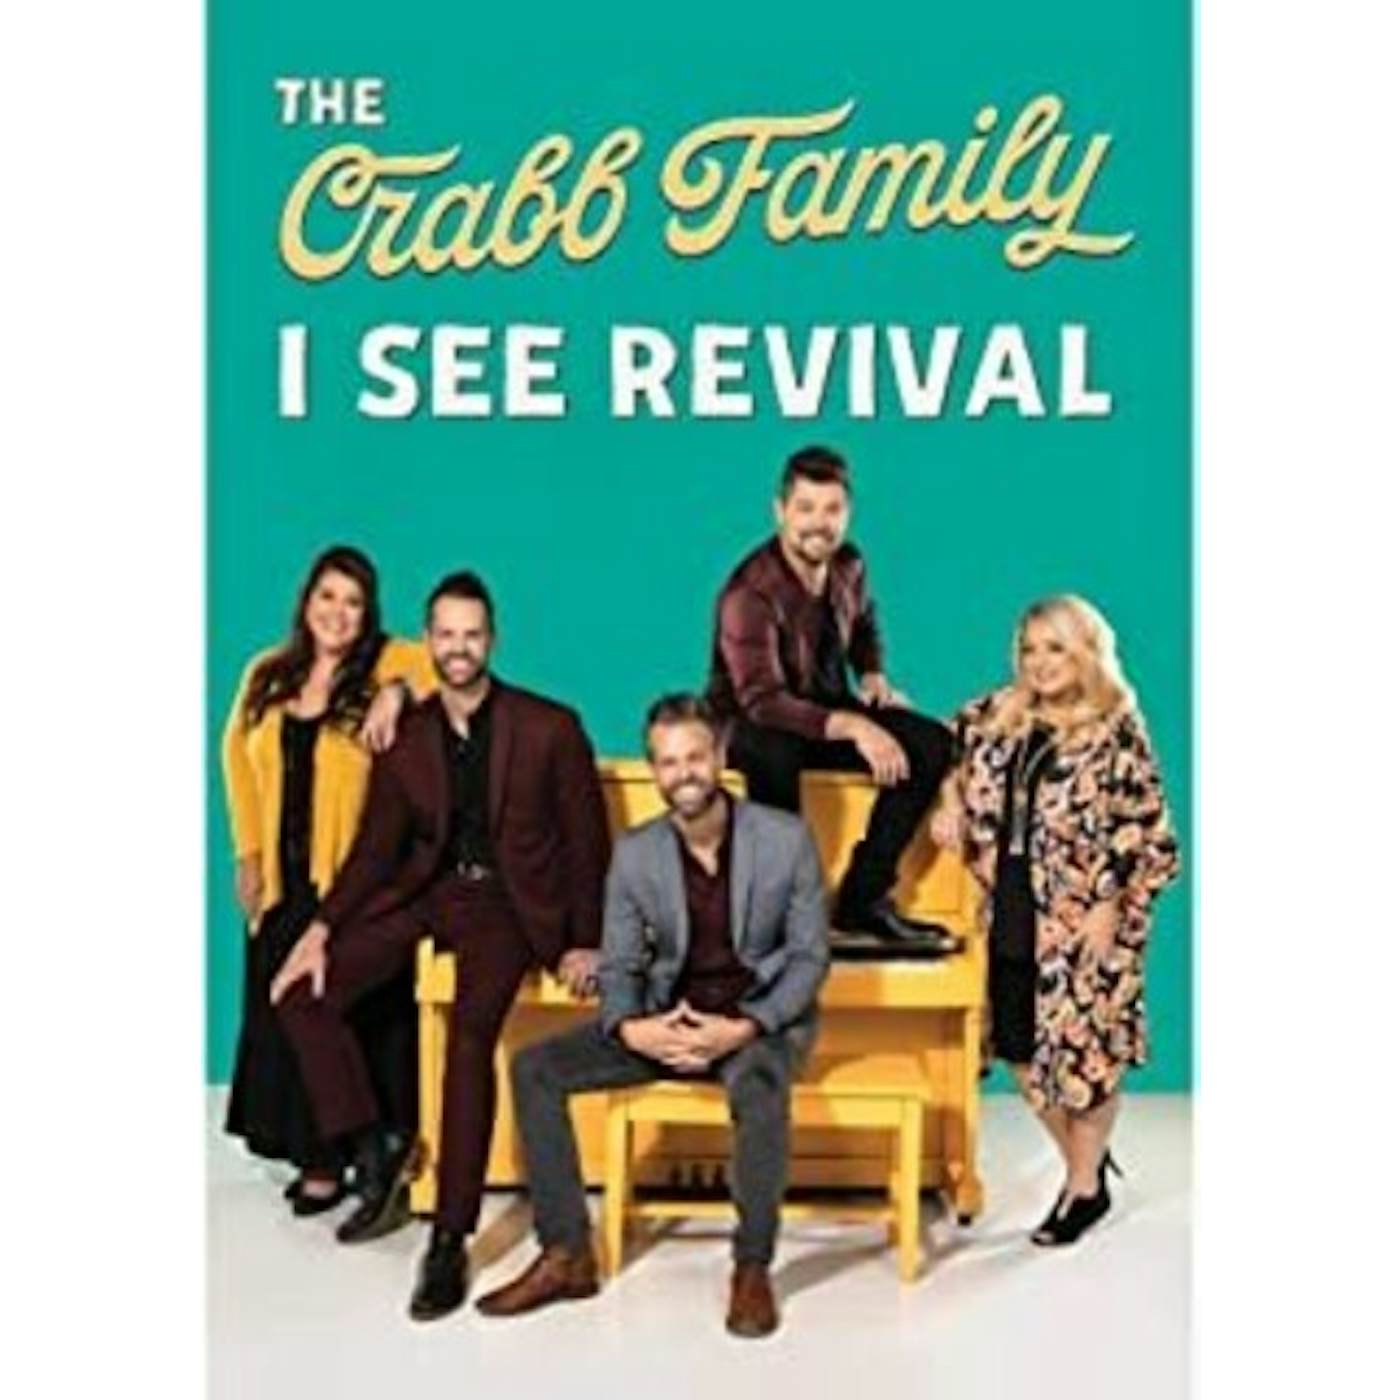 The Crabb Family I SEE REVIVAL DVD